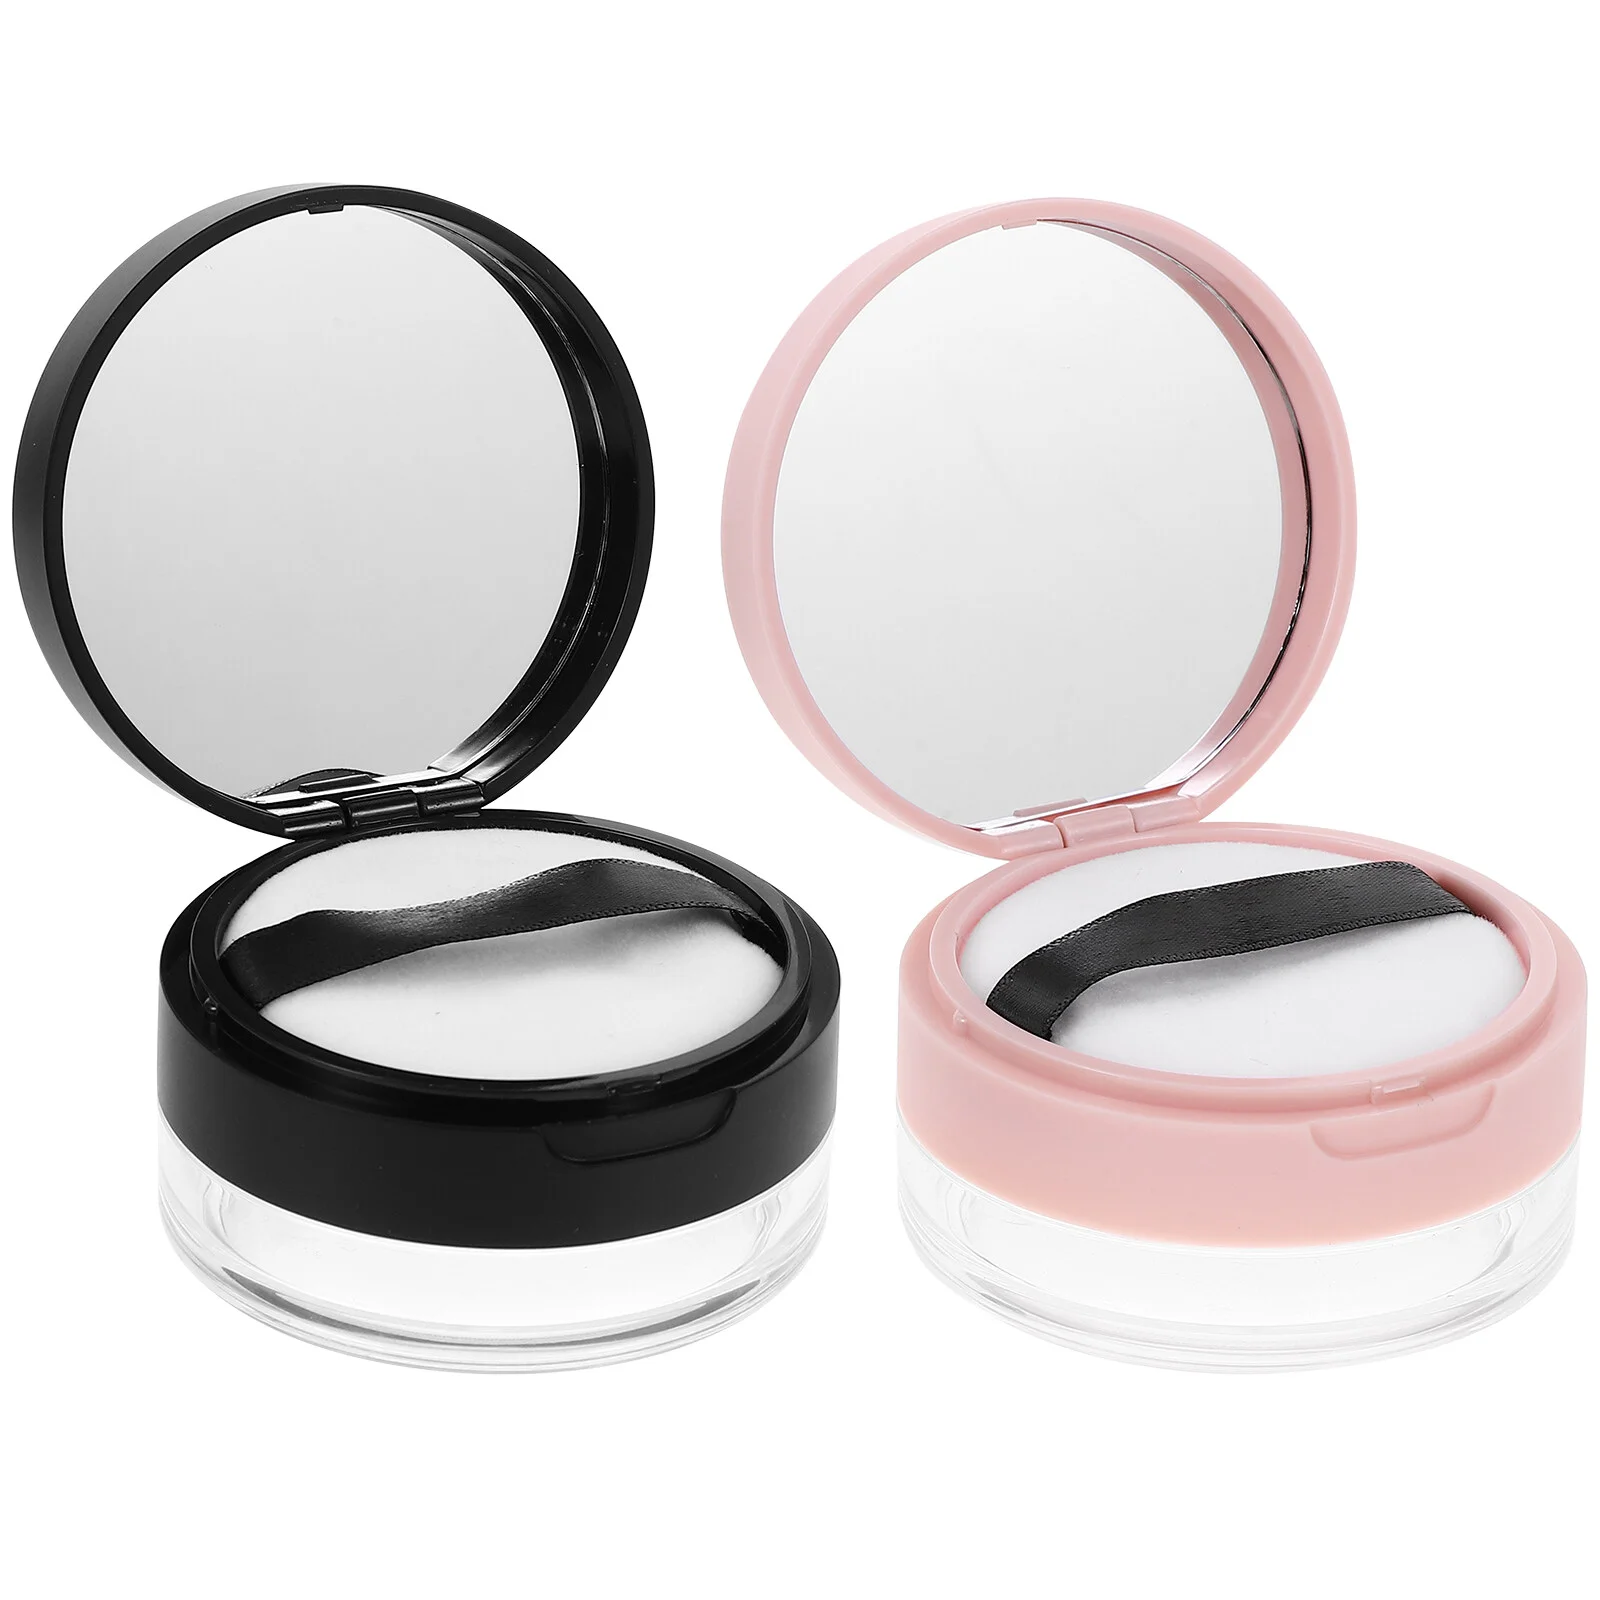 2 Pcs Makeup Travel Containers Puff Powder Applicator Body Loose 6.8x6.8cm Baby Small Plastic Empty